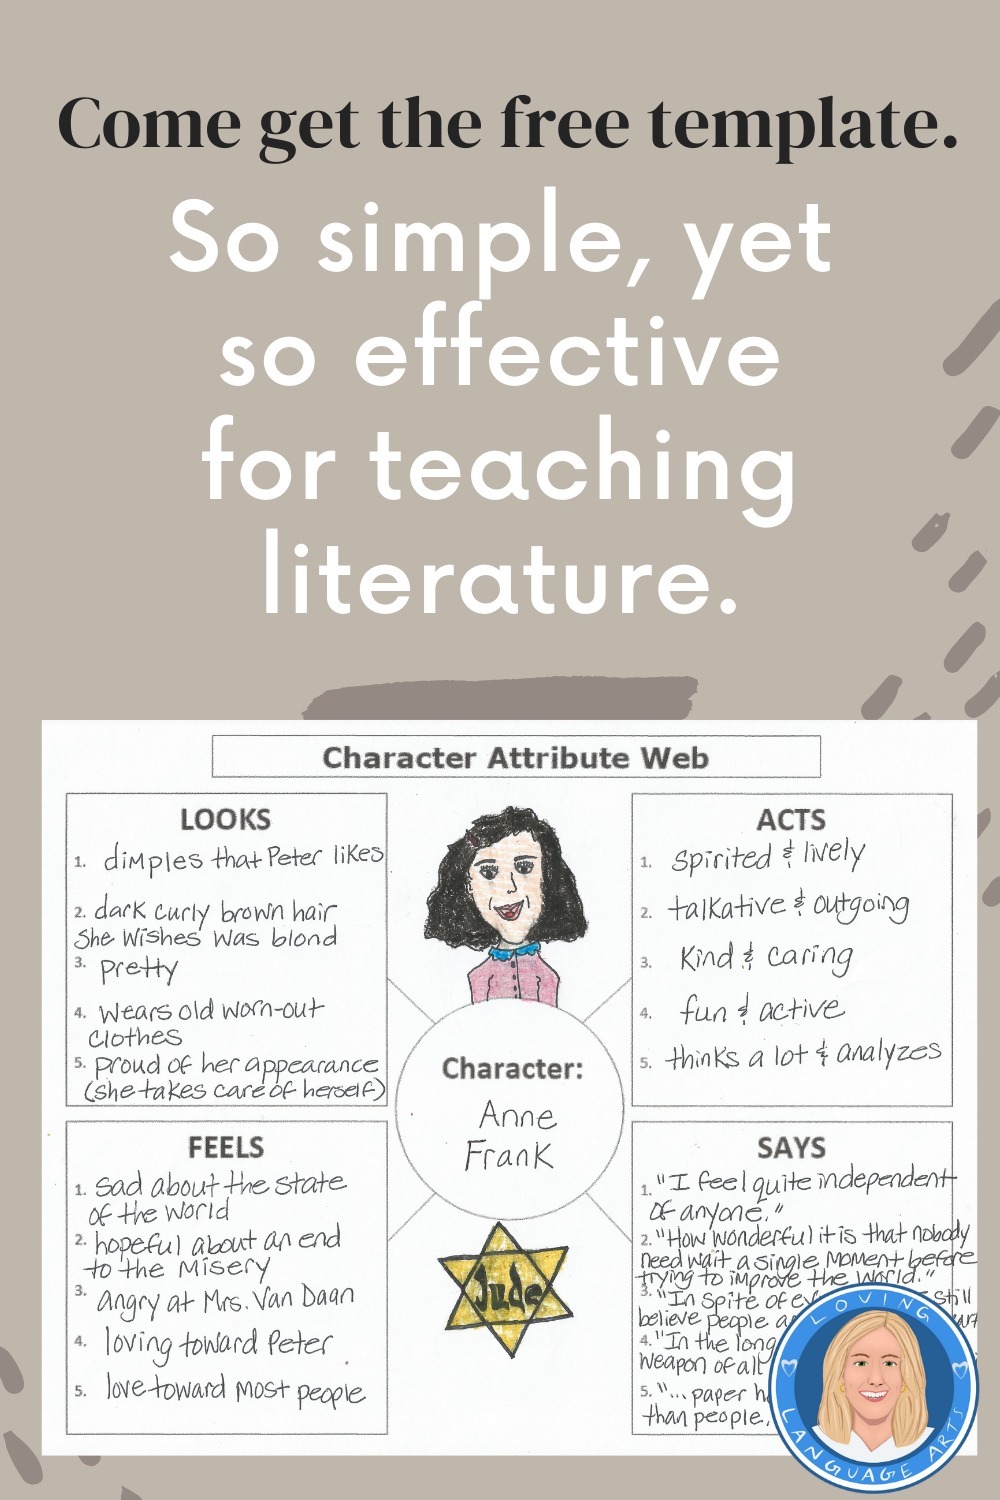 character attribute web for reading literature activity pin